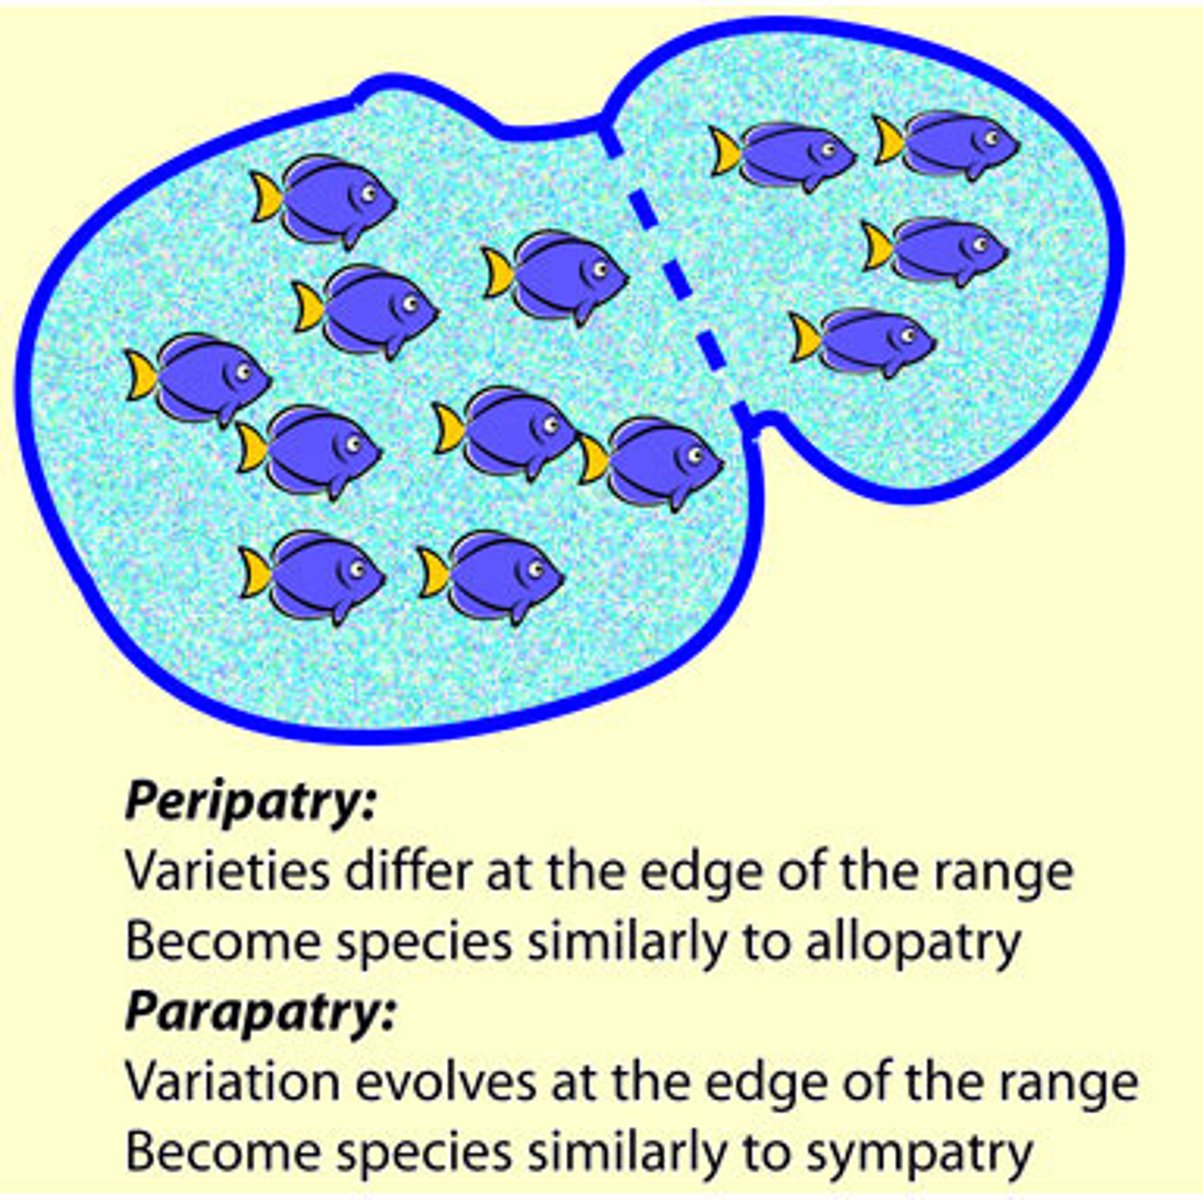 <p>-Reproductive isolation evolves in neighboring populations that share small zones of contact and exhibit modest gene exchange</p><p>-Genetic divergence arises largely through natural selection</p><p>-Often differences in mating habits due to different ecological conditions (nonrandom mating)</p>